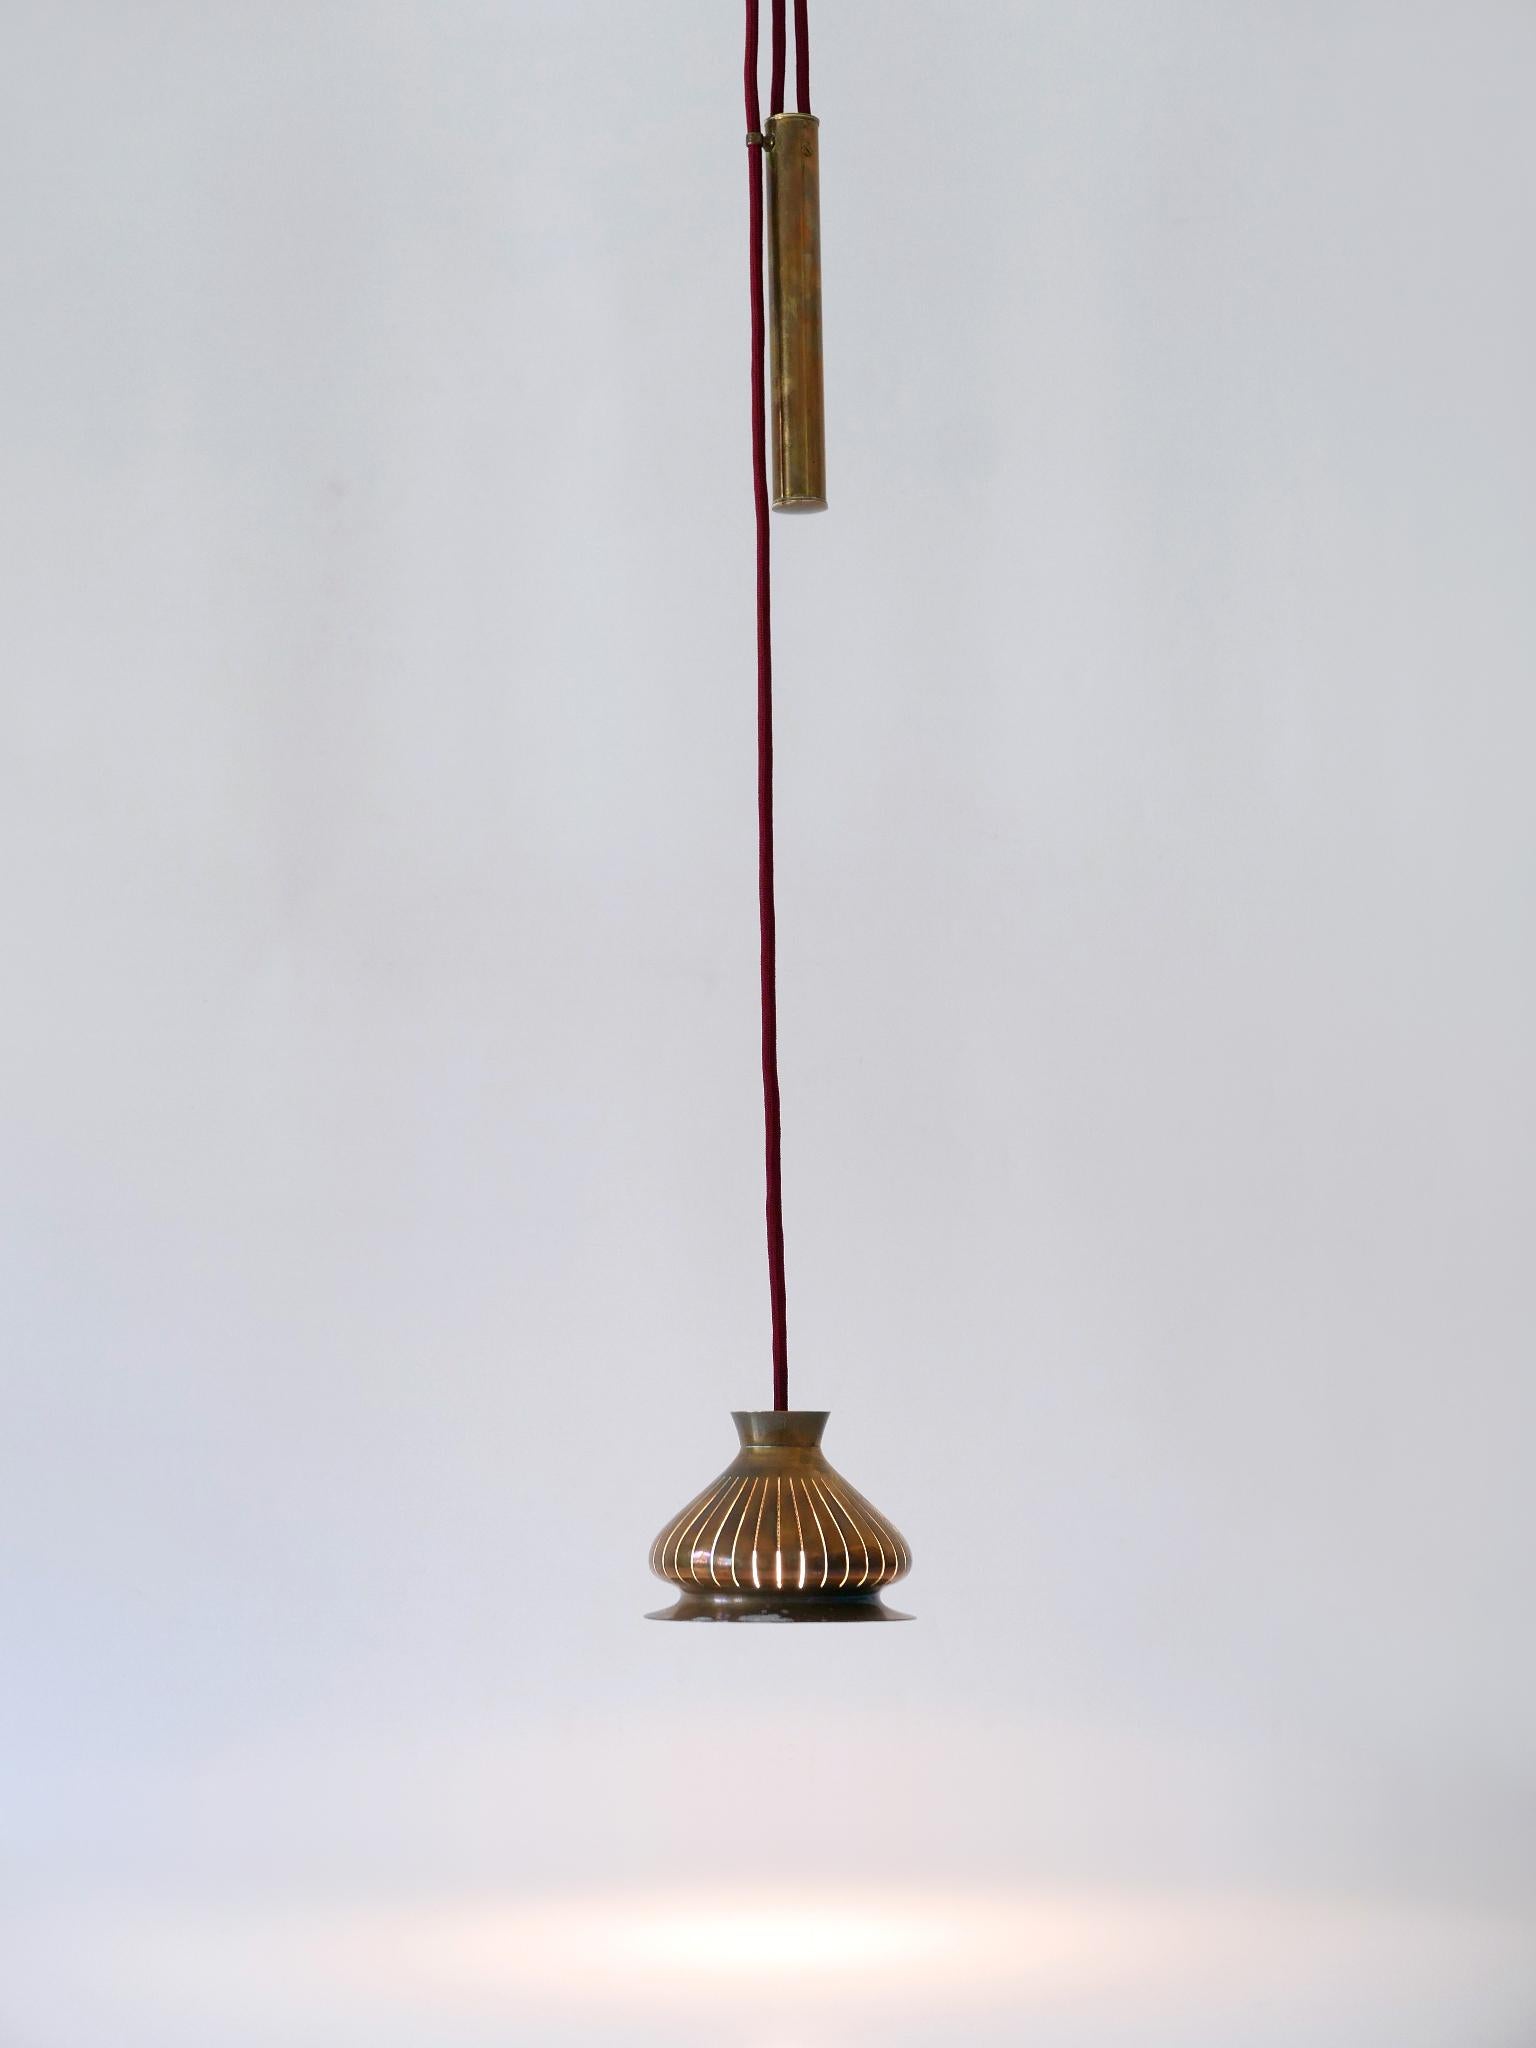 Extremely Rare Mid Century Modern Counterweight Brass Pendant Lamp Germany 1950s For Sale 4